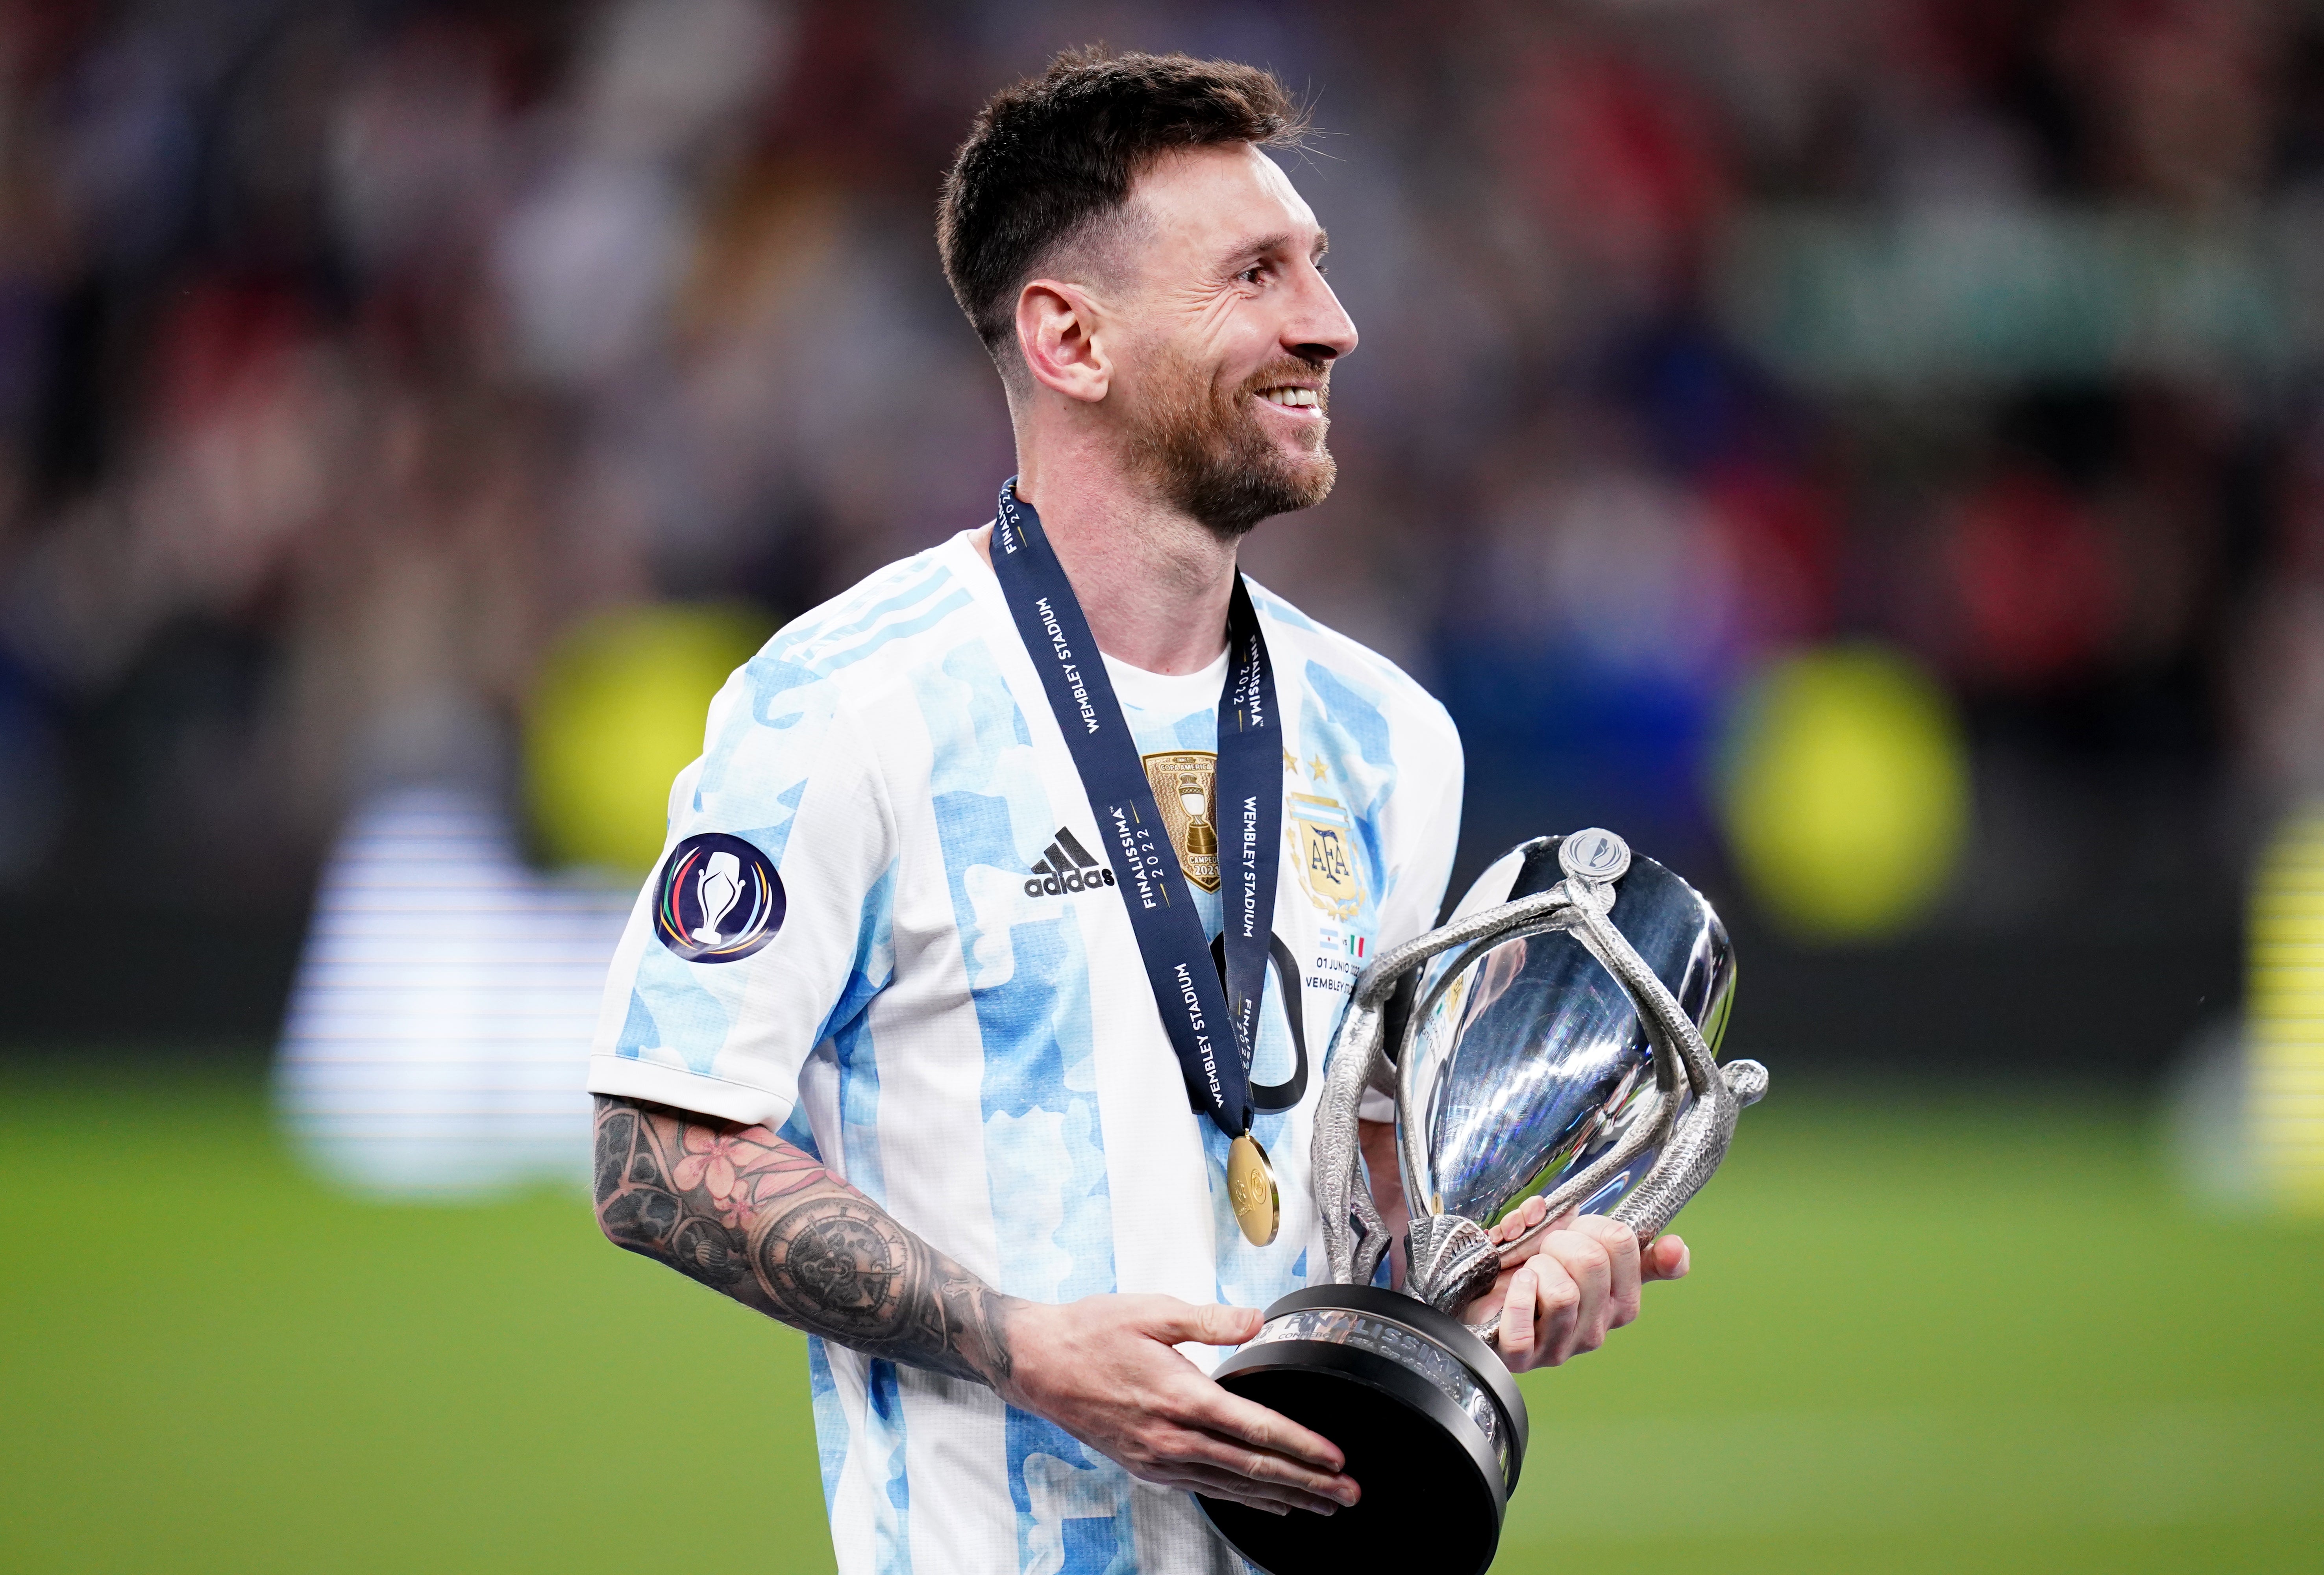 Messi shone as Argentina underlined their World Cup credentials (John Walton/PA)